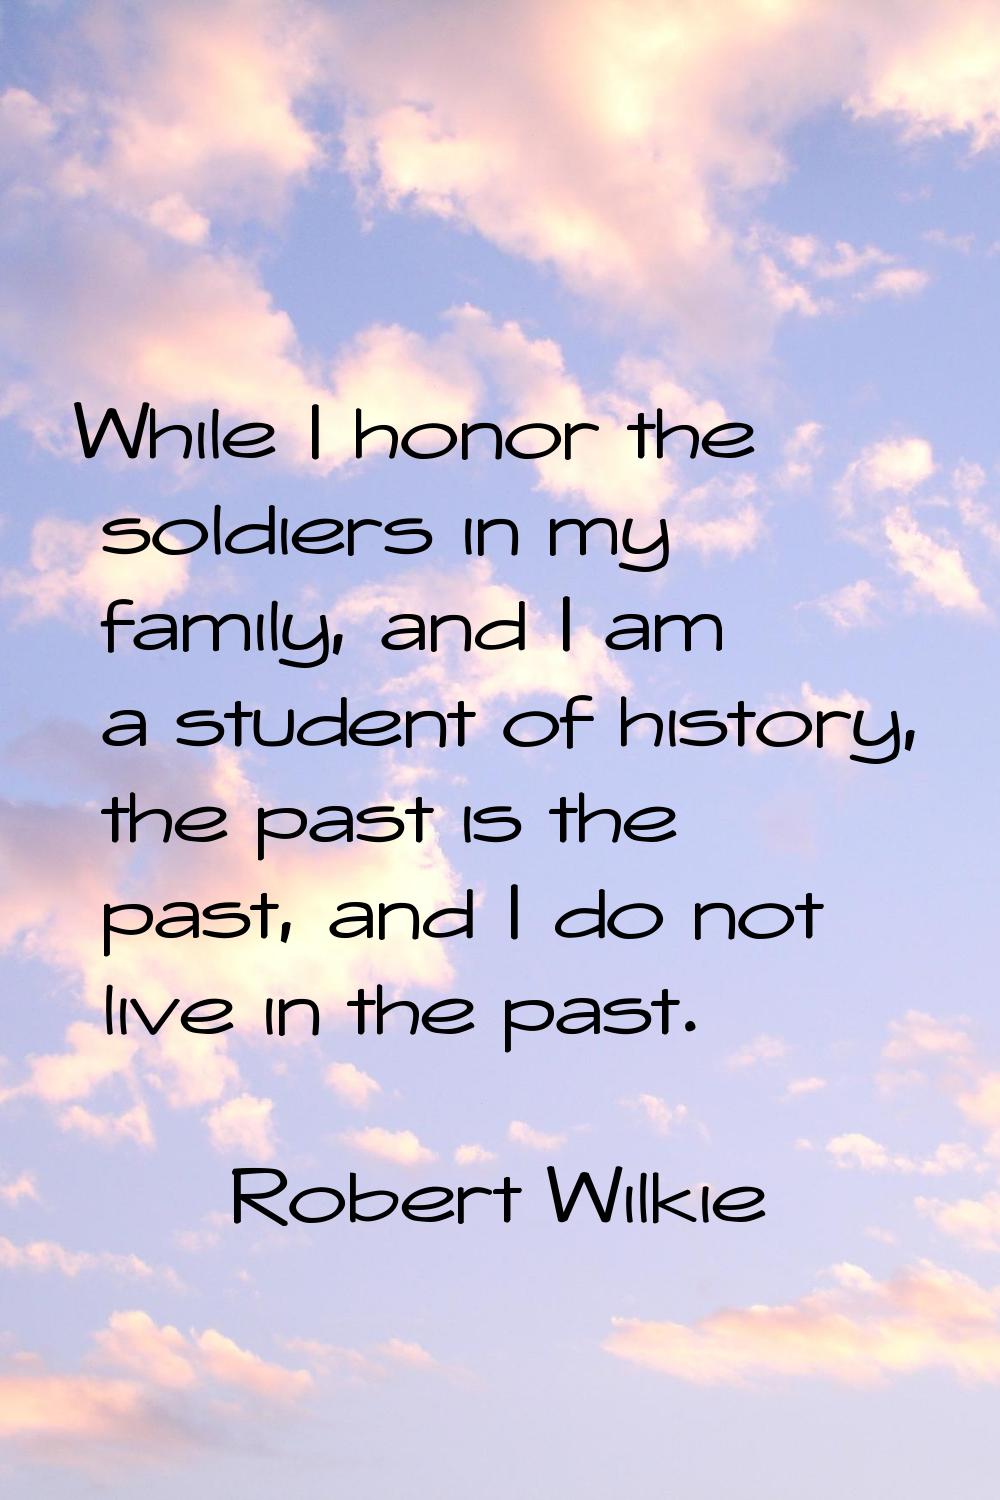 While I honor the soldiers in my family, and I am a student of history, the past is the past, and I